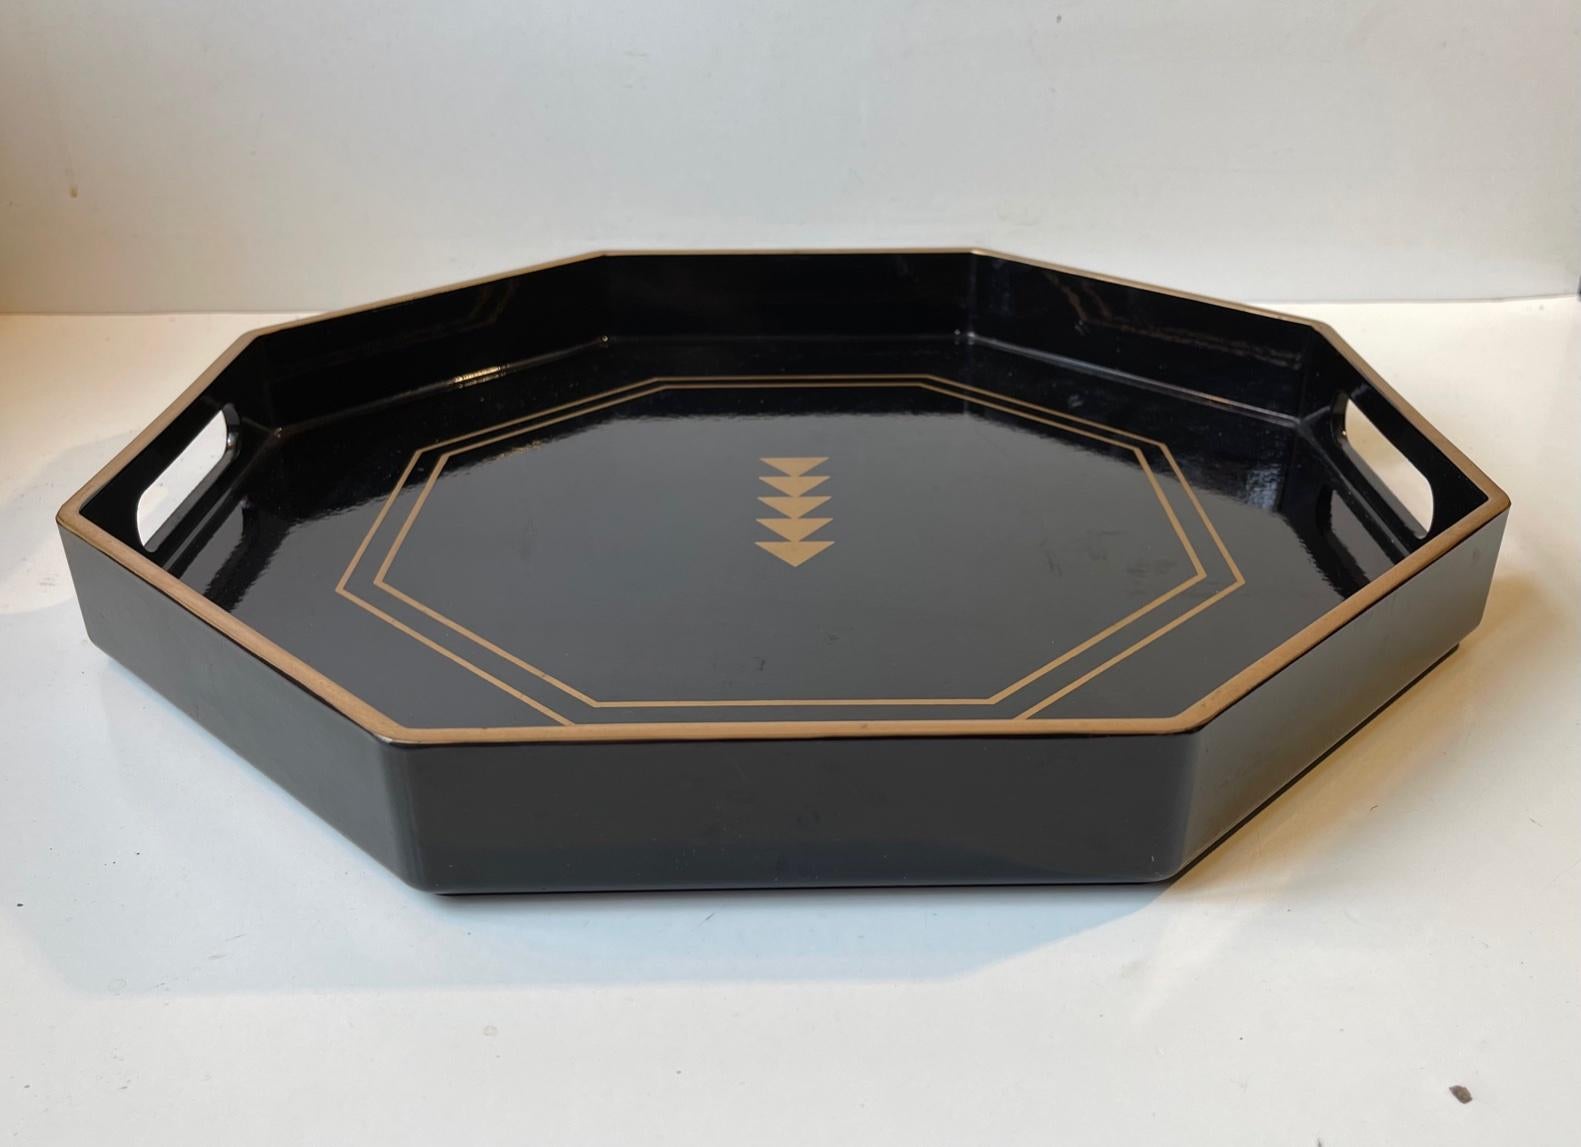 Wooden octagonal serving tray in black lacquer decorated with gold paint to the edges and the geometric centermotif. It was made in Japan during the 1960 or 70s. Measurements: W: 37.5 cm, H: 4.5 cm.